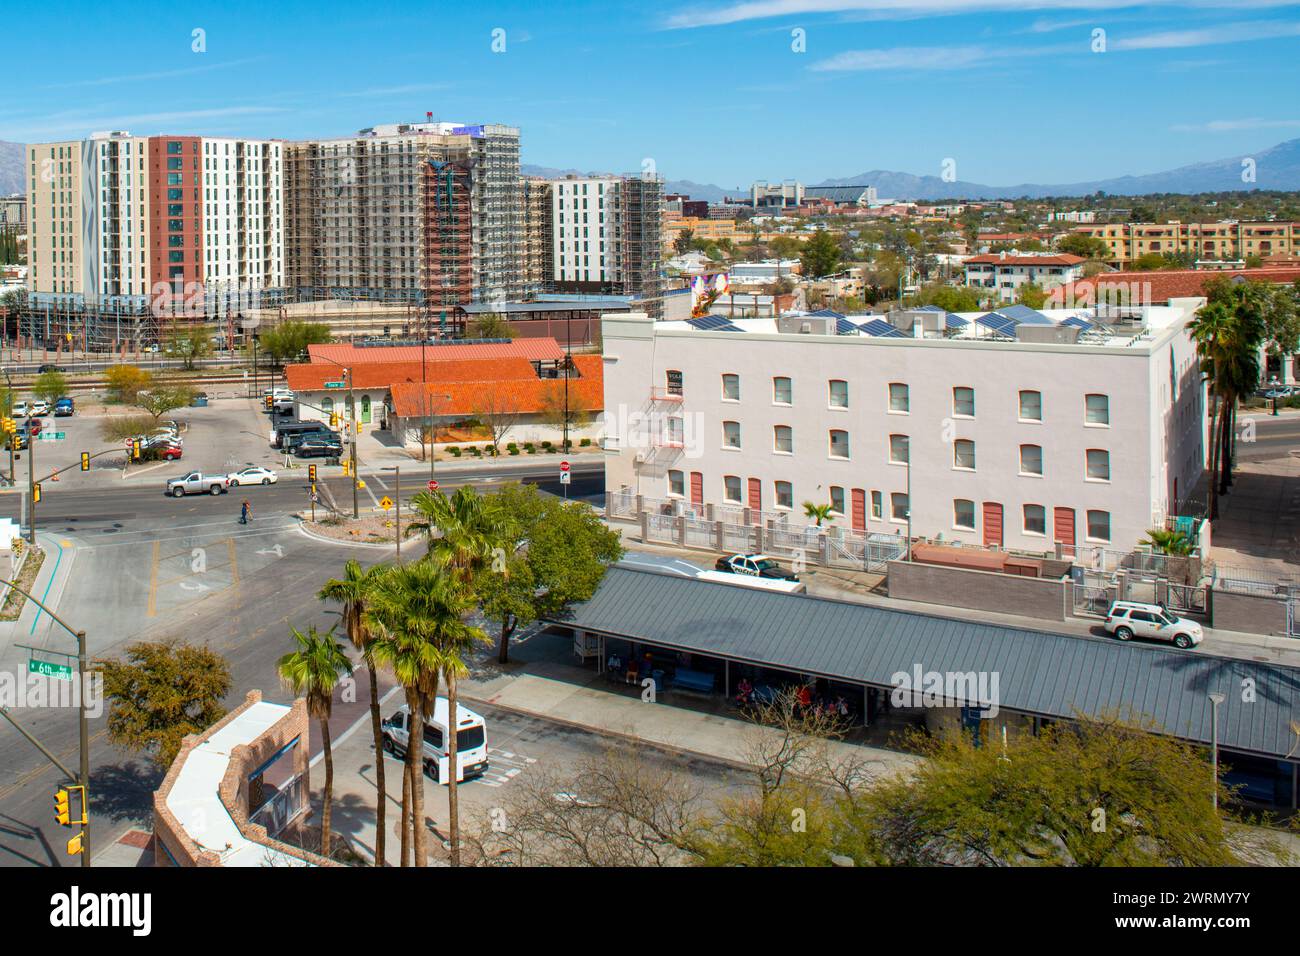 Aerial view of the AMTRAK Railways station and apartments in downtown Tucson, AZ Stock Photo